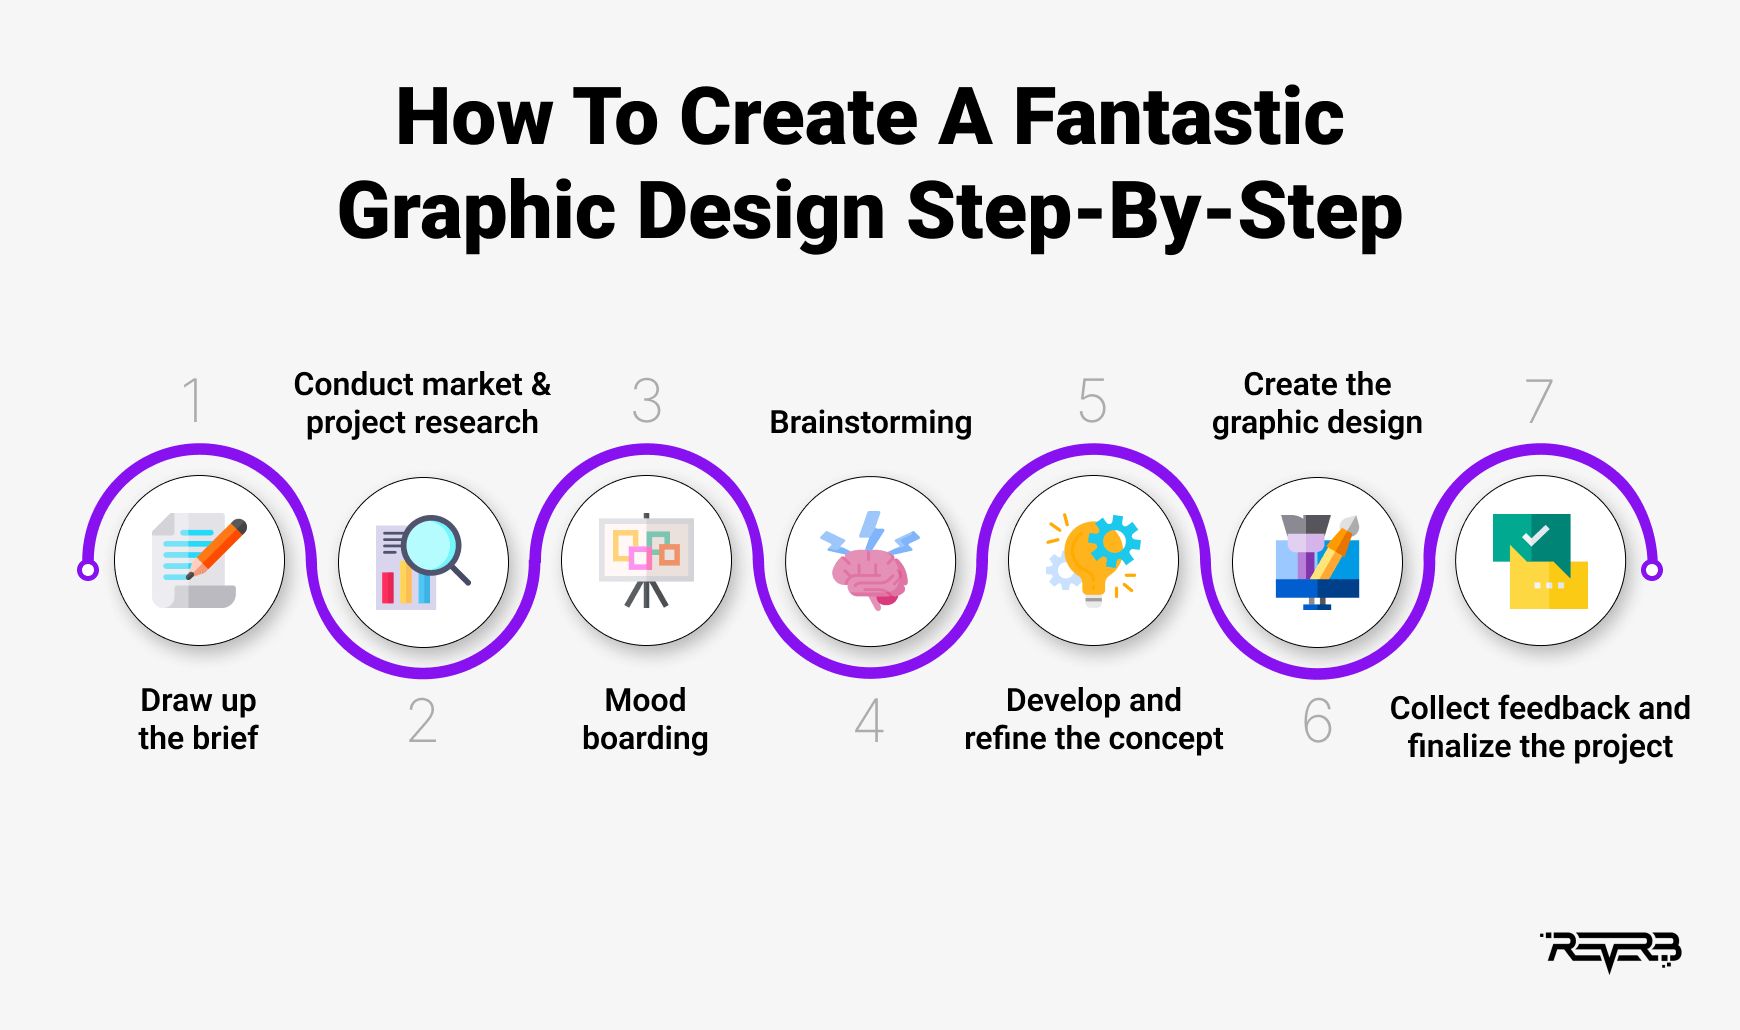 7 Steps To An Exceptional Graphic Design Process | REVERB